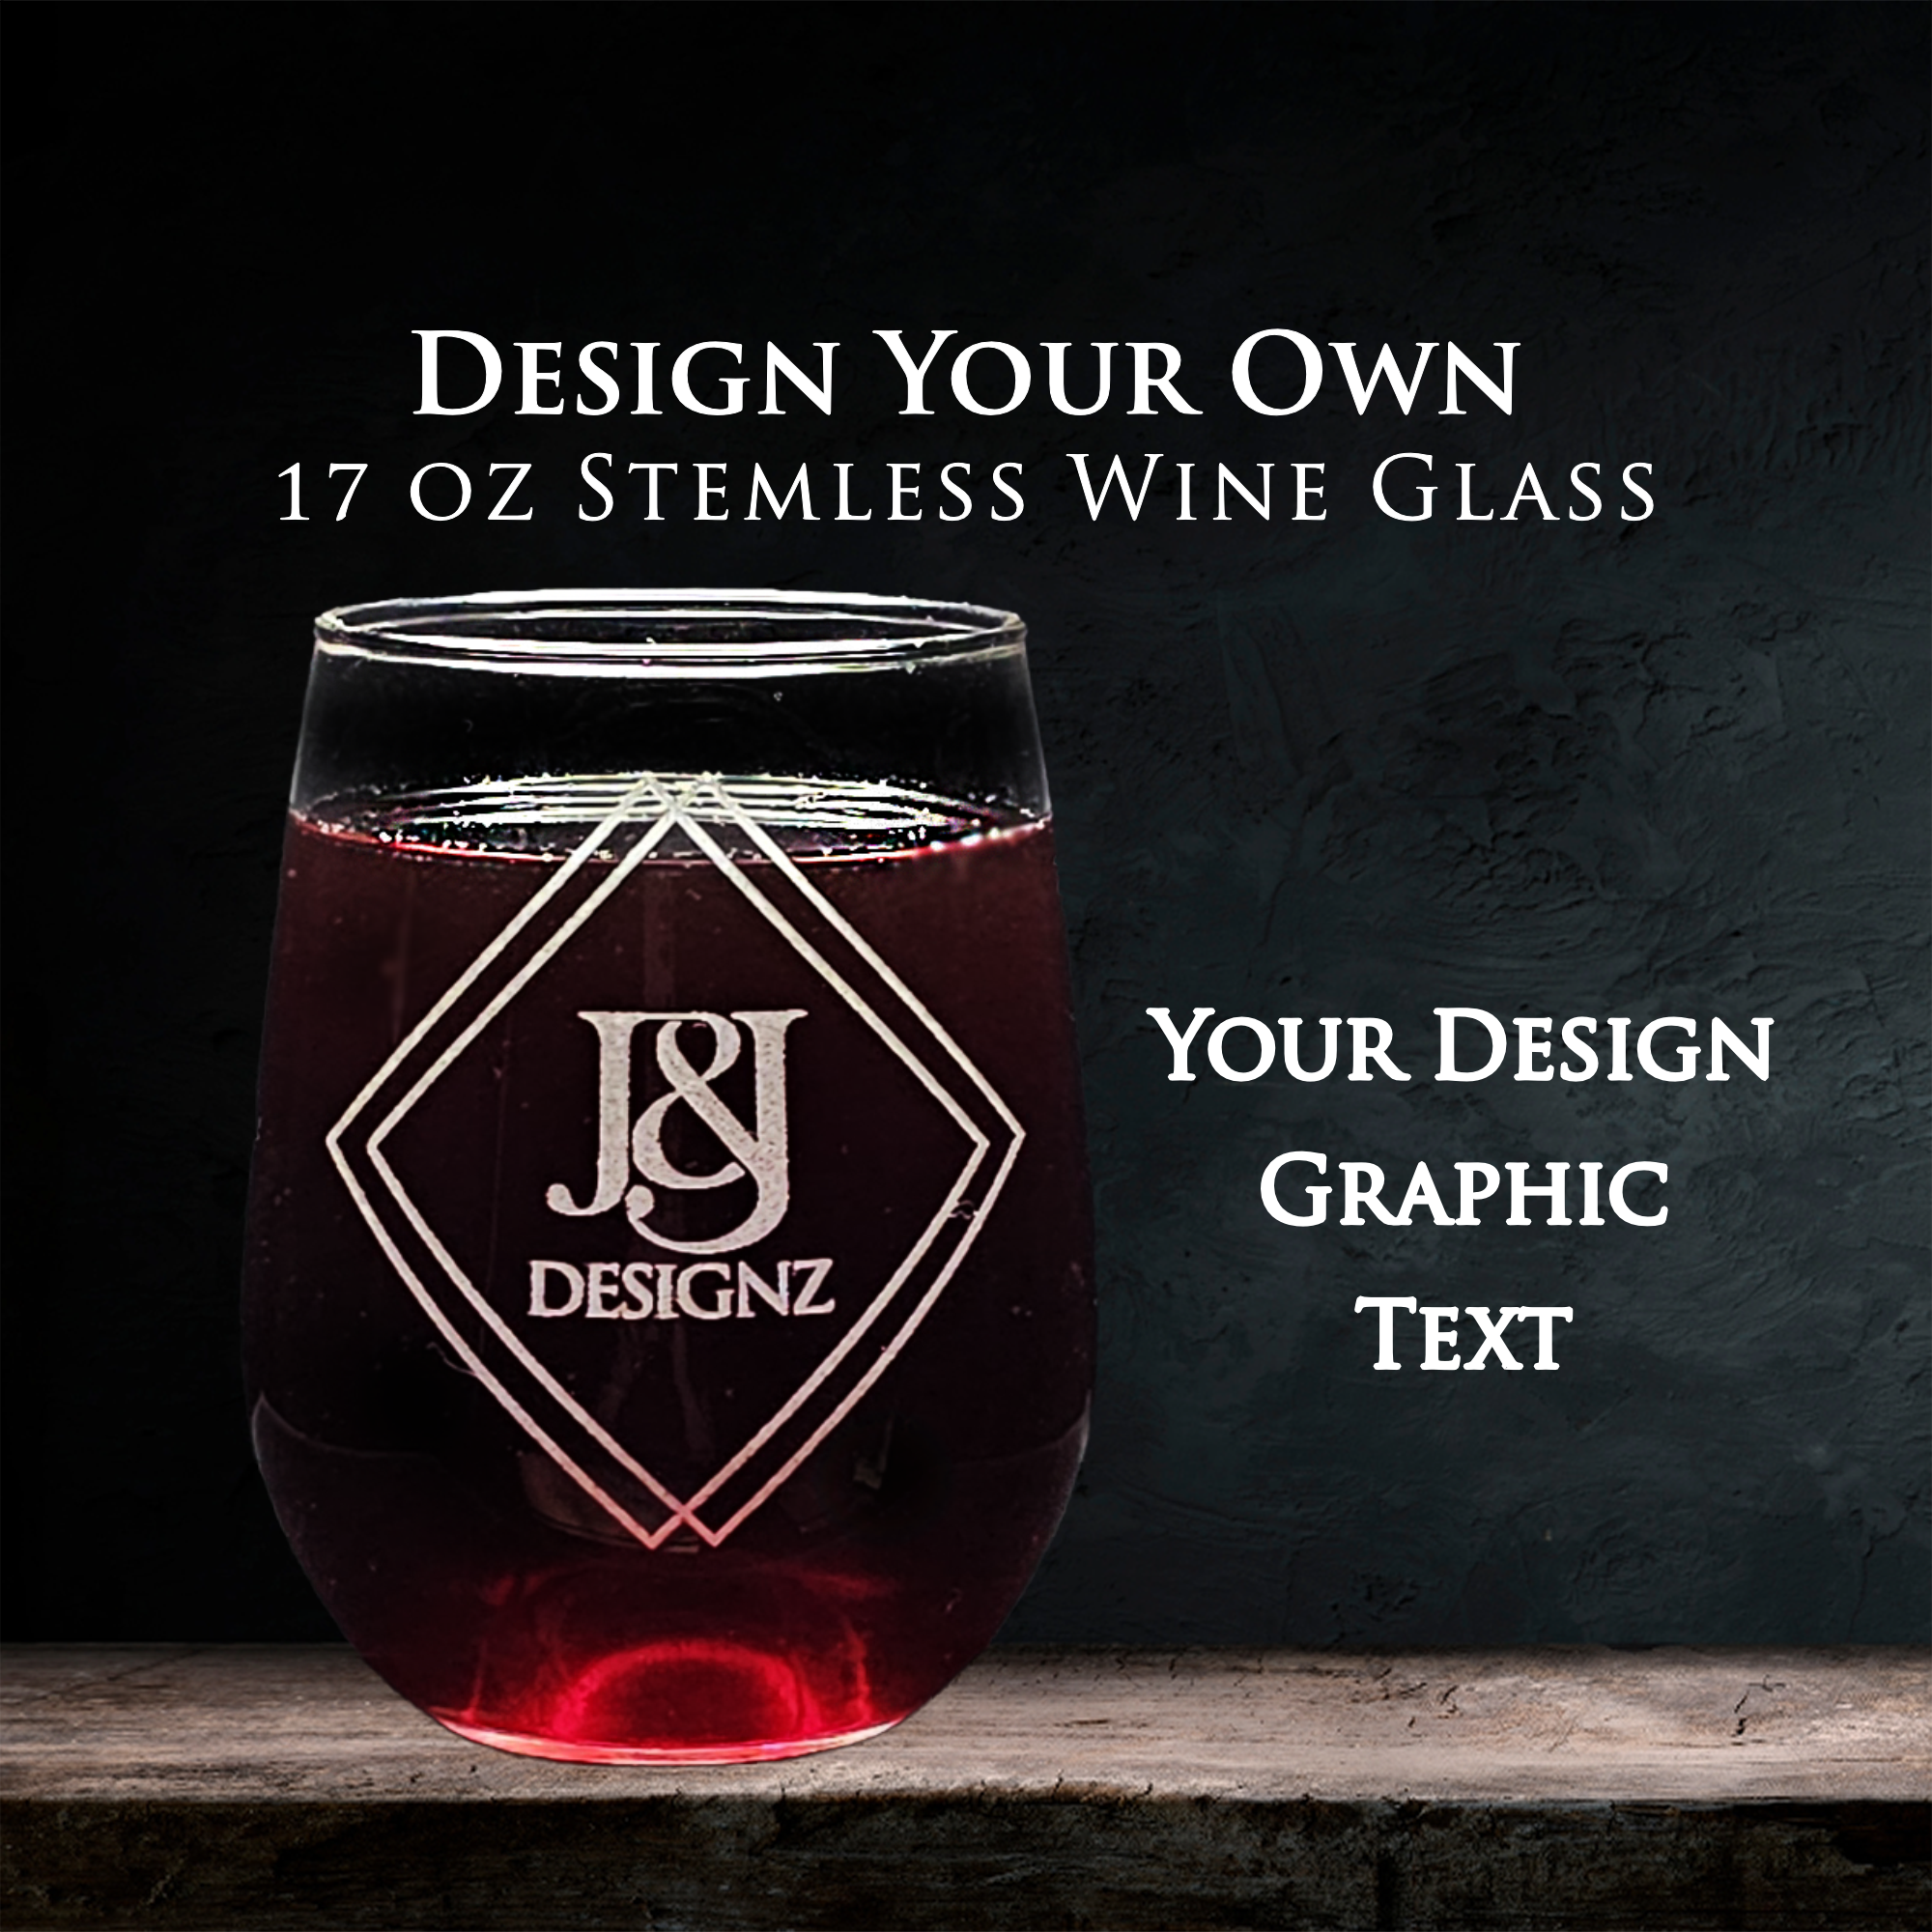 https://cdn11.bigcommerce.com/s-k04rzdusrs/images/stencil/original/products/146/814/Custom_Etched_17oz_Stemless_Wine_Glass_Your_Design_Logo_Graphic_Text__54727.1699466275.png?c=1